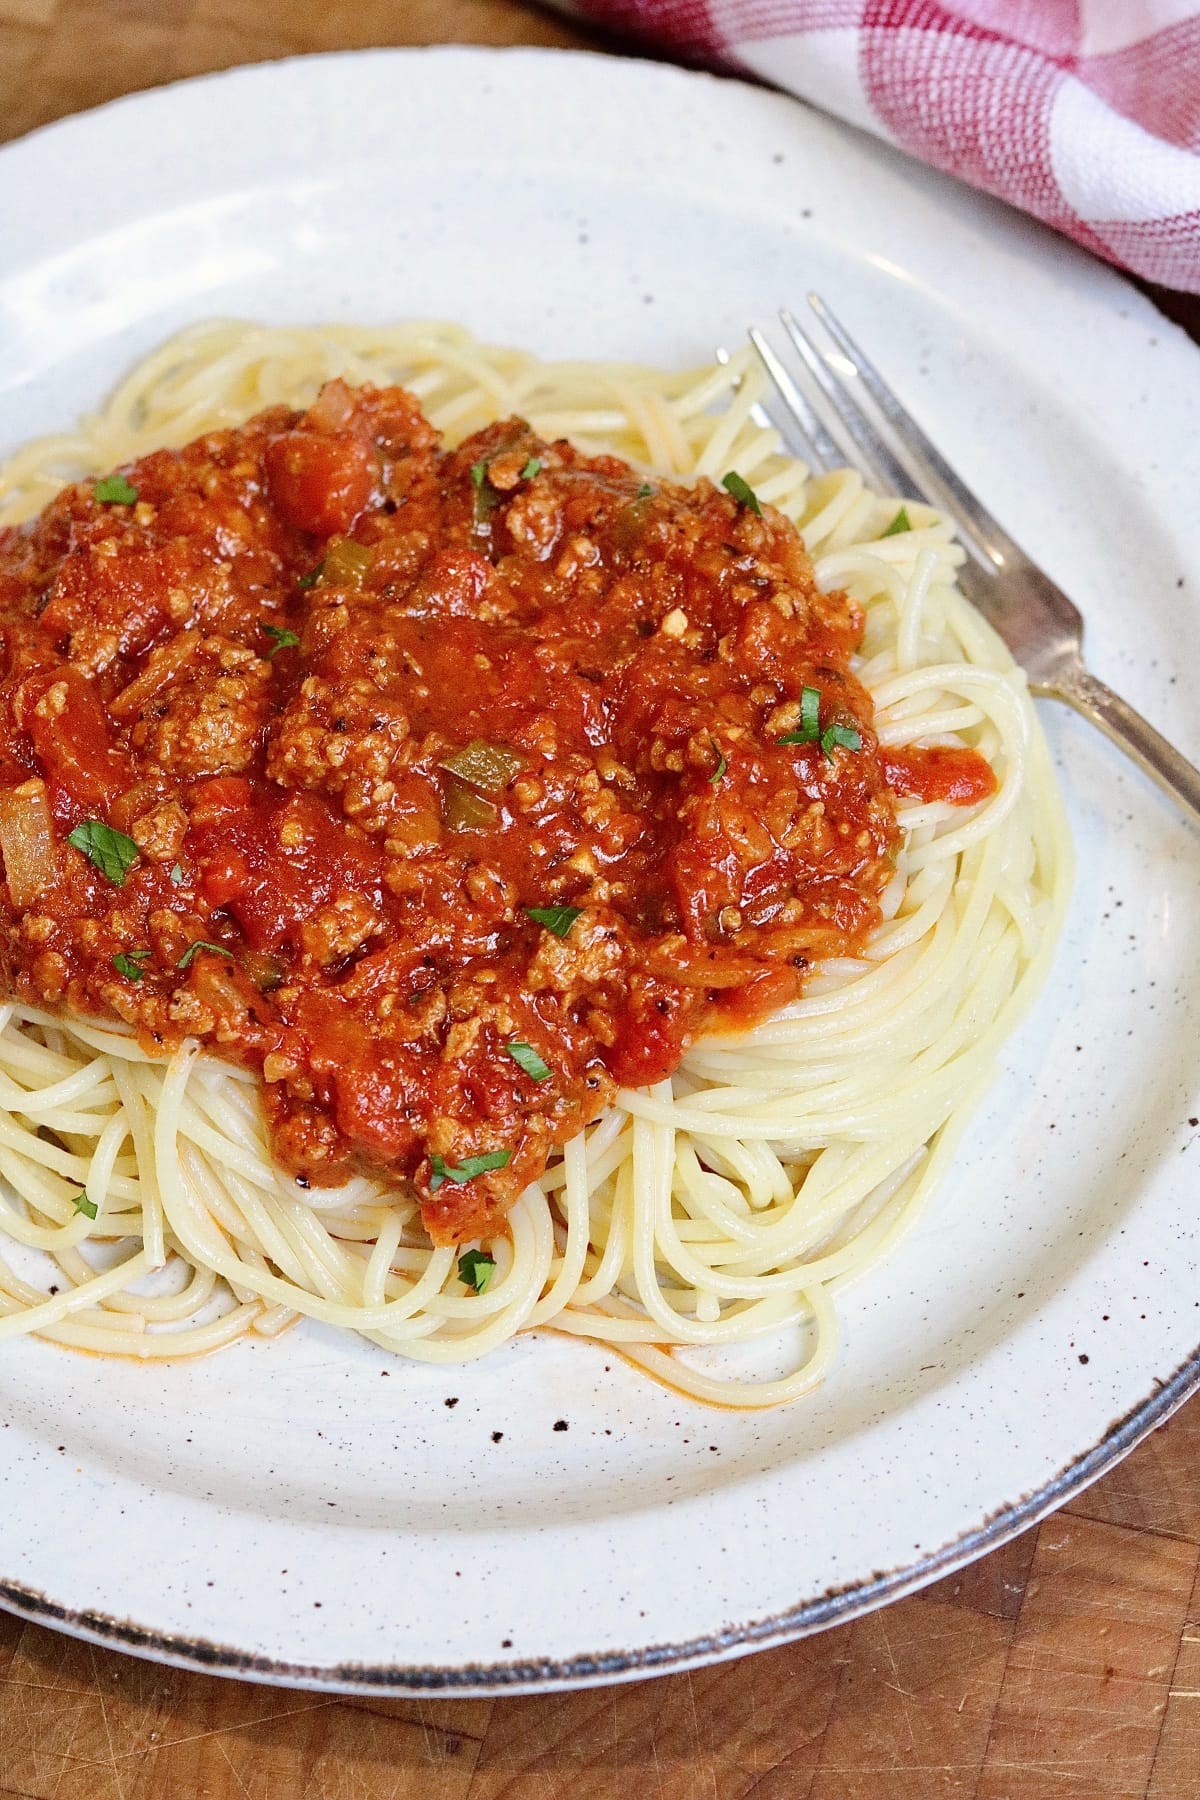 Easy Vegan Spaghetti with “Meat” Sauce - The Cheeky Chickpea